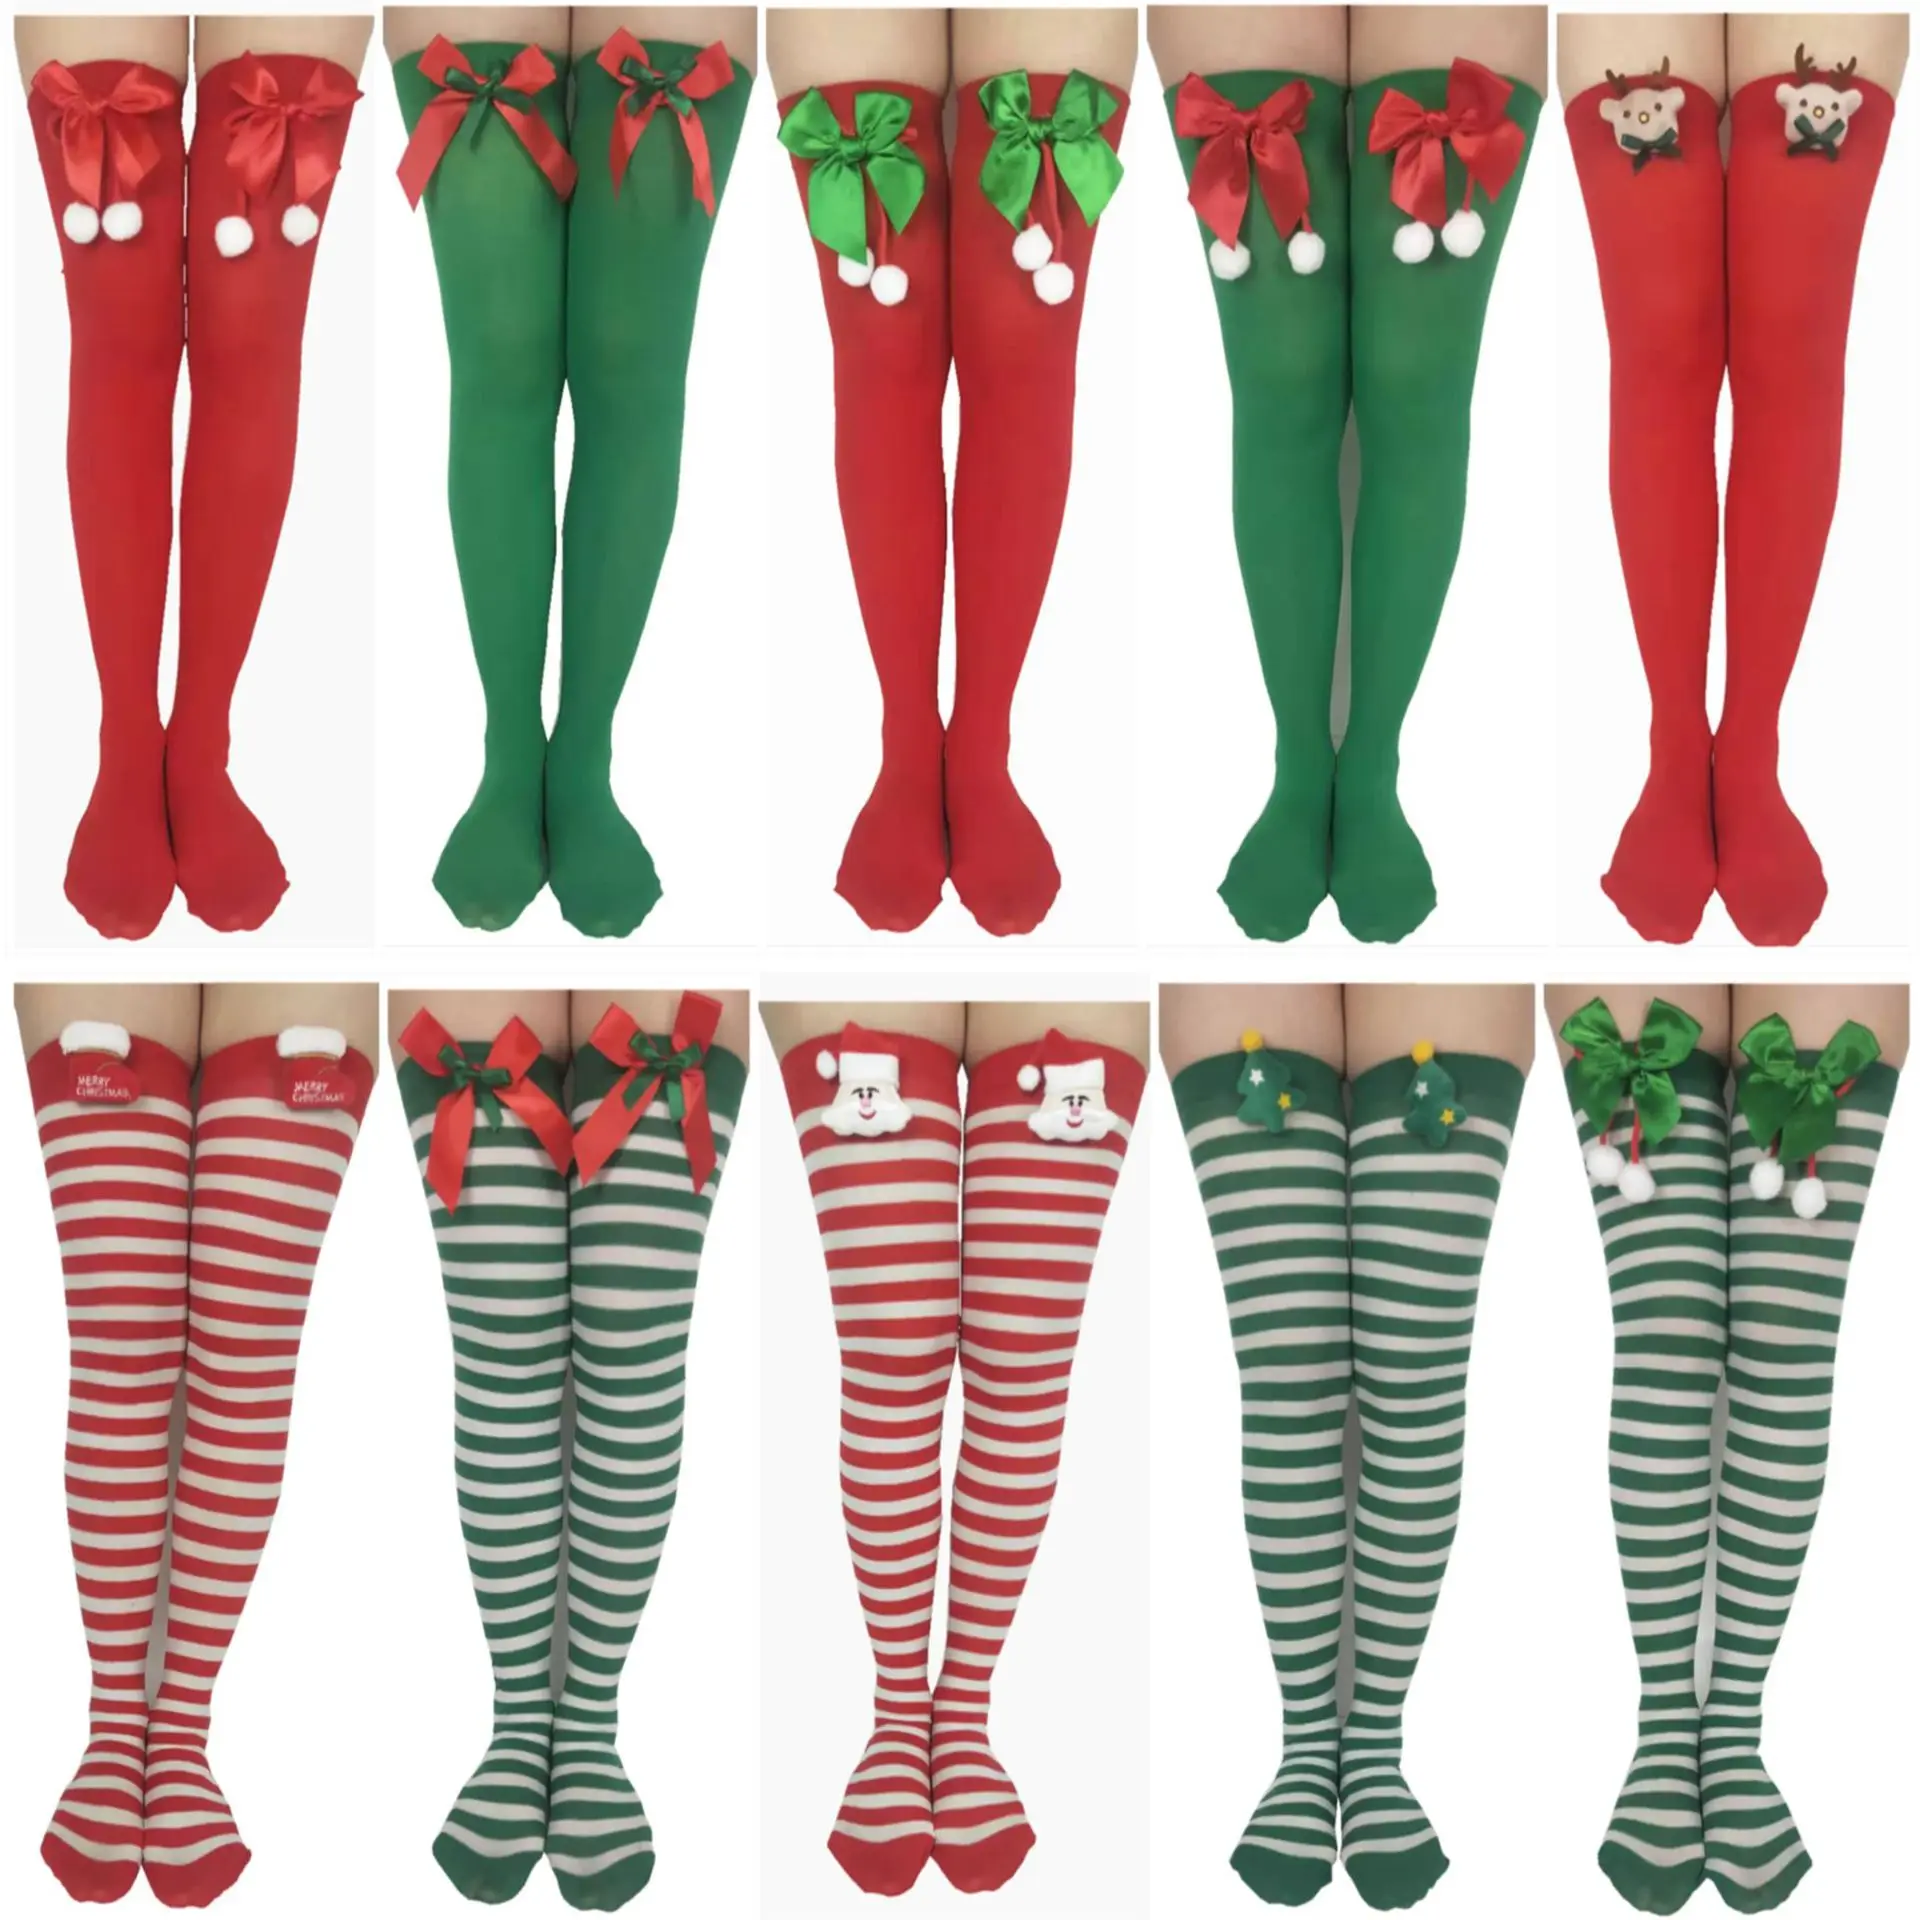 Manufacturers supply Christmas stockings party dress accessories socks Christmas over knee socks bow stockings stockings sexy